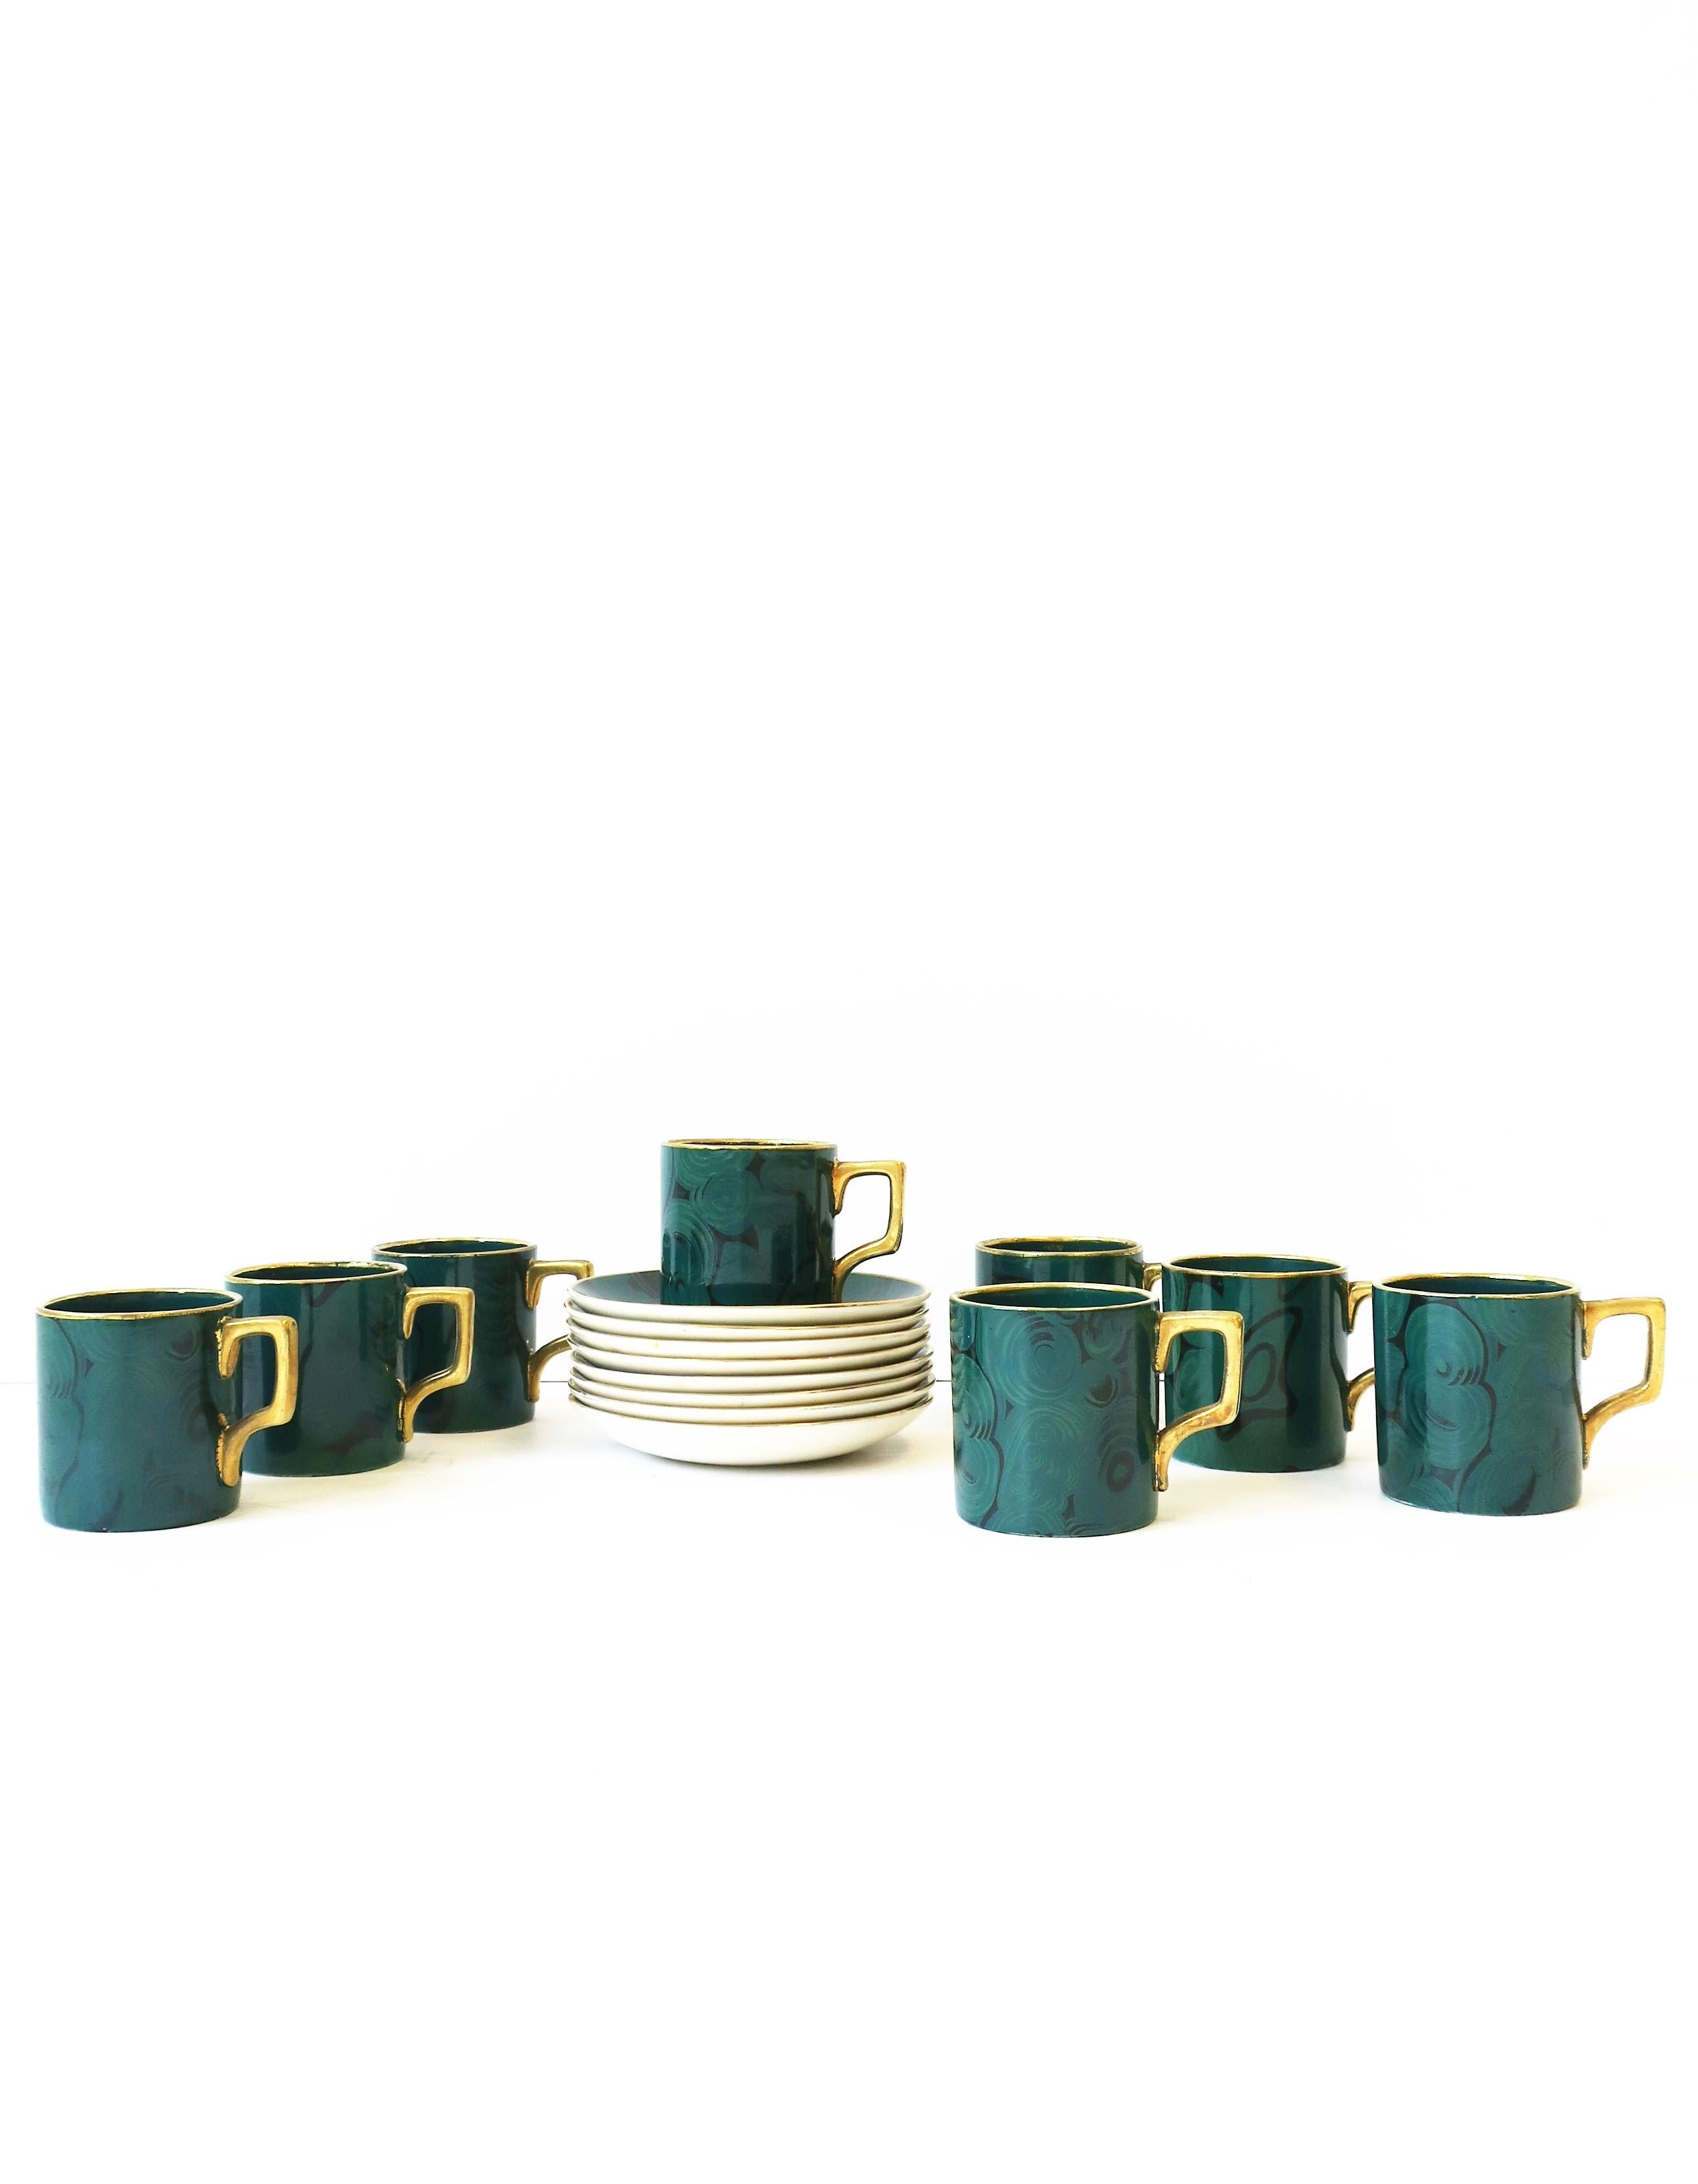 A beautiful and rare set of eight (8) English Portmeirion green Malachite and gold espresso coffee or demitasse tea cup and saucer, circa 20th century, 1960, England, by renowned British Designer, Susan Williams-Ellis. Both cup and saucer have a